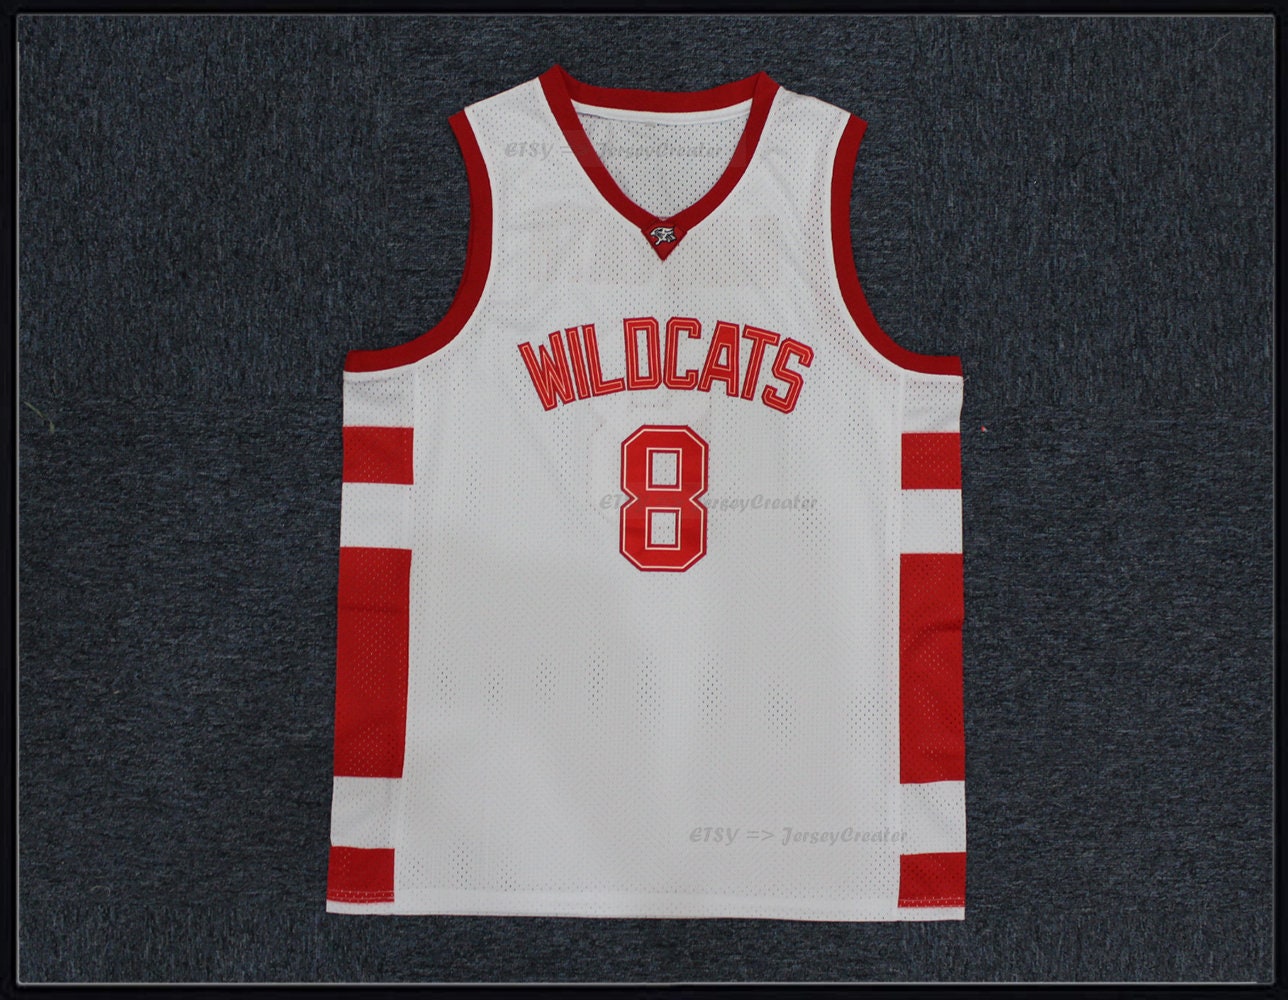 JerseyCreater Throwback Chad Danforth #8 East High School Basketball Jersey Wildcats Top Sewn White;Custom Names;Youth/Kids/Adult Size